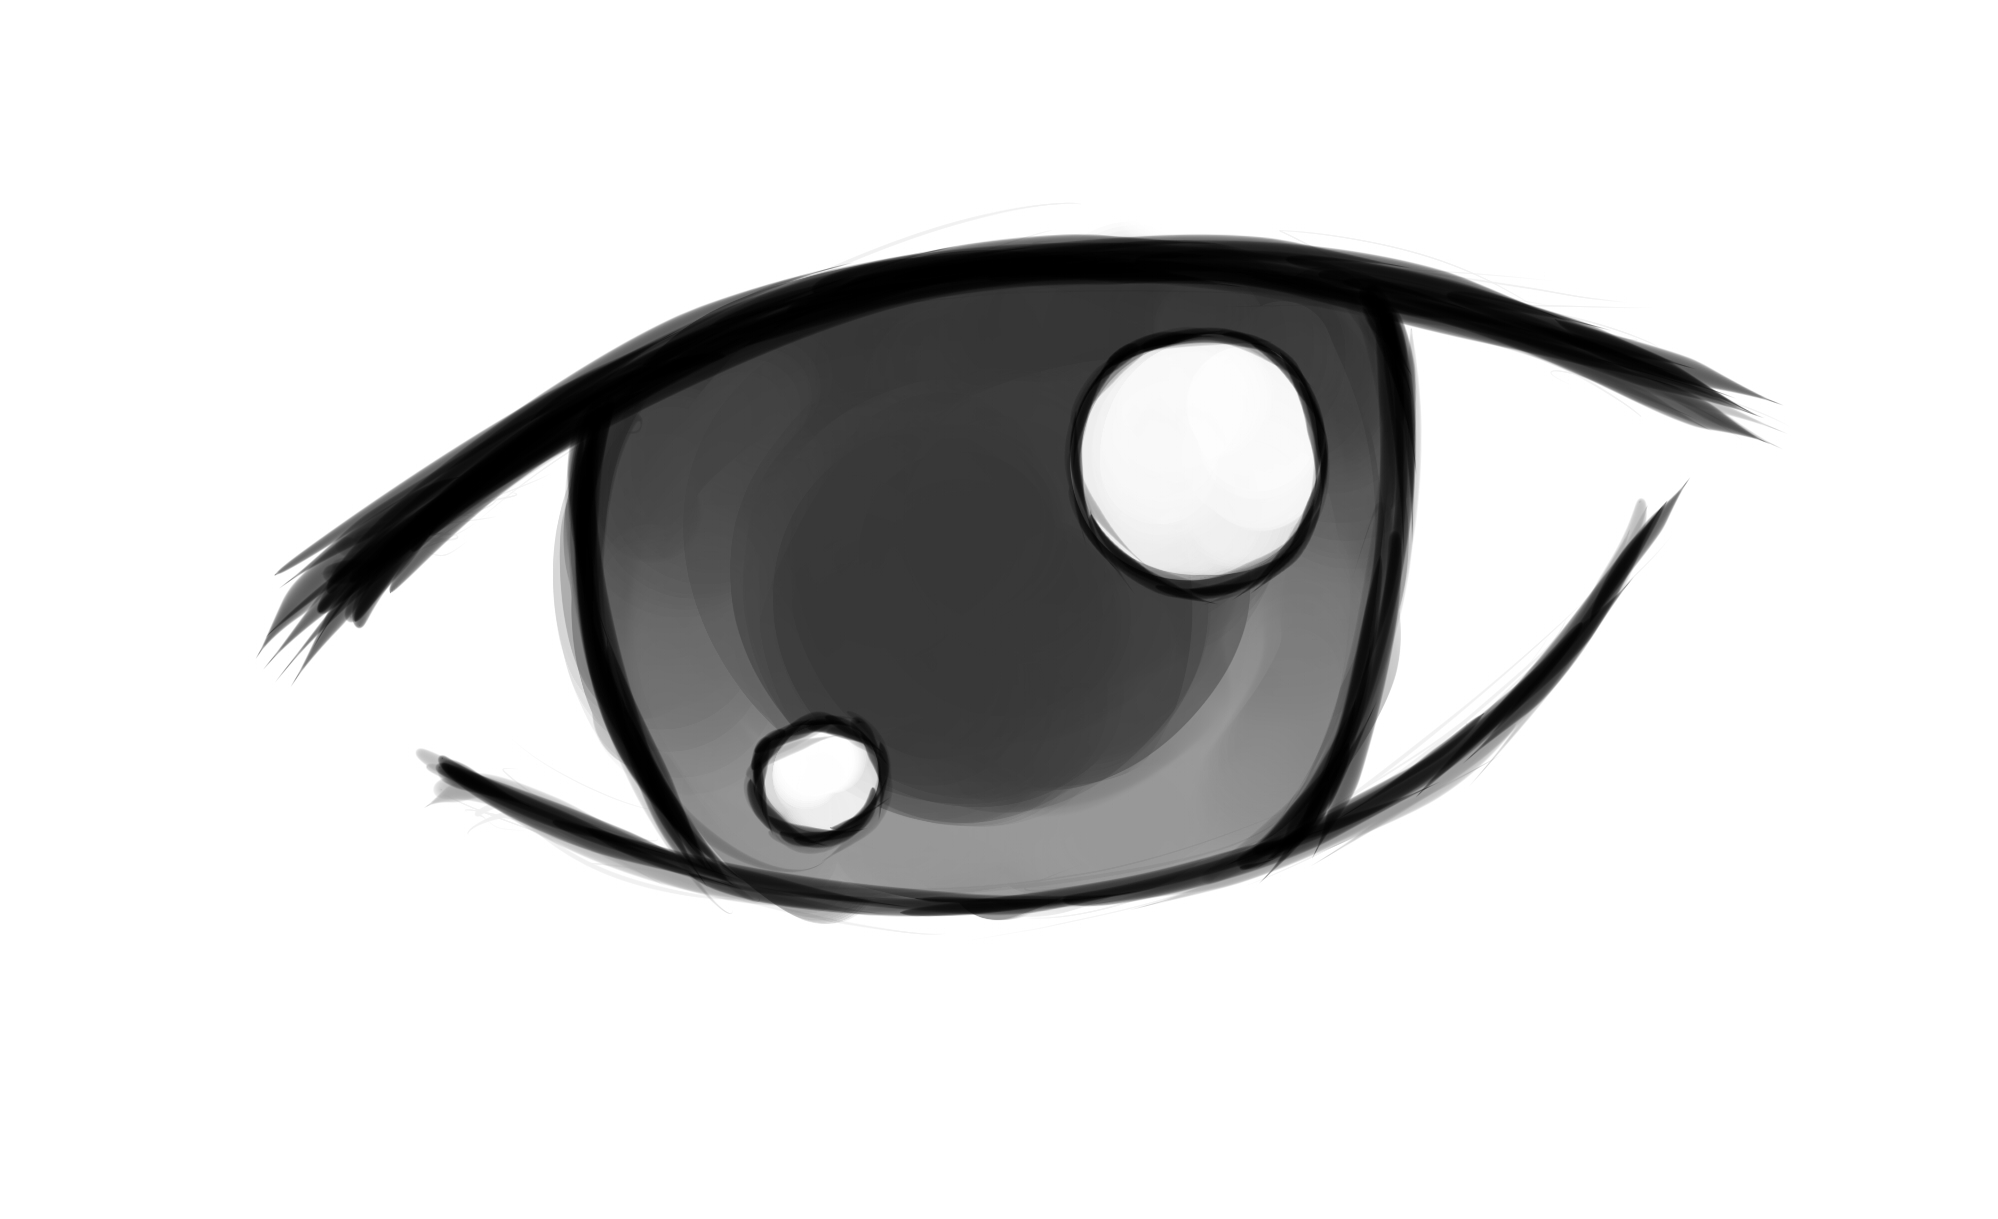 How to Draw a Realistic Eye - Step by Step | Winged Canvas Blog